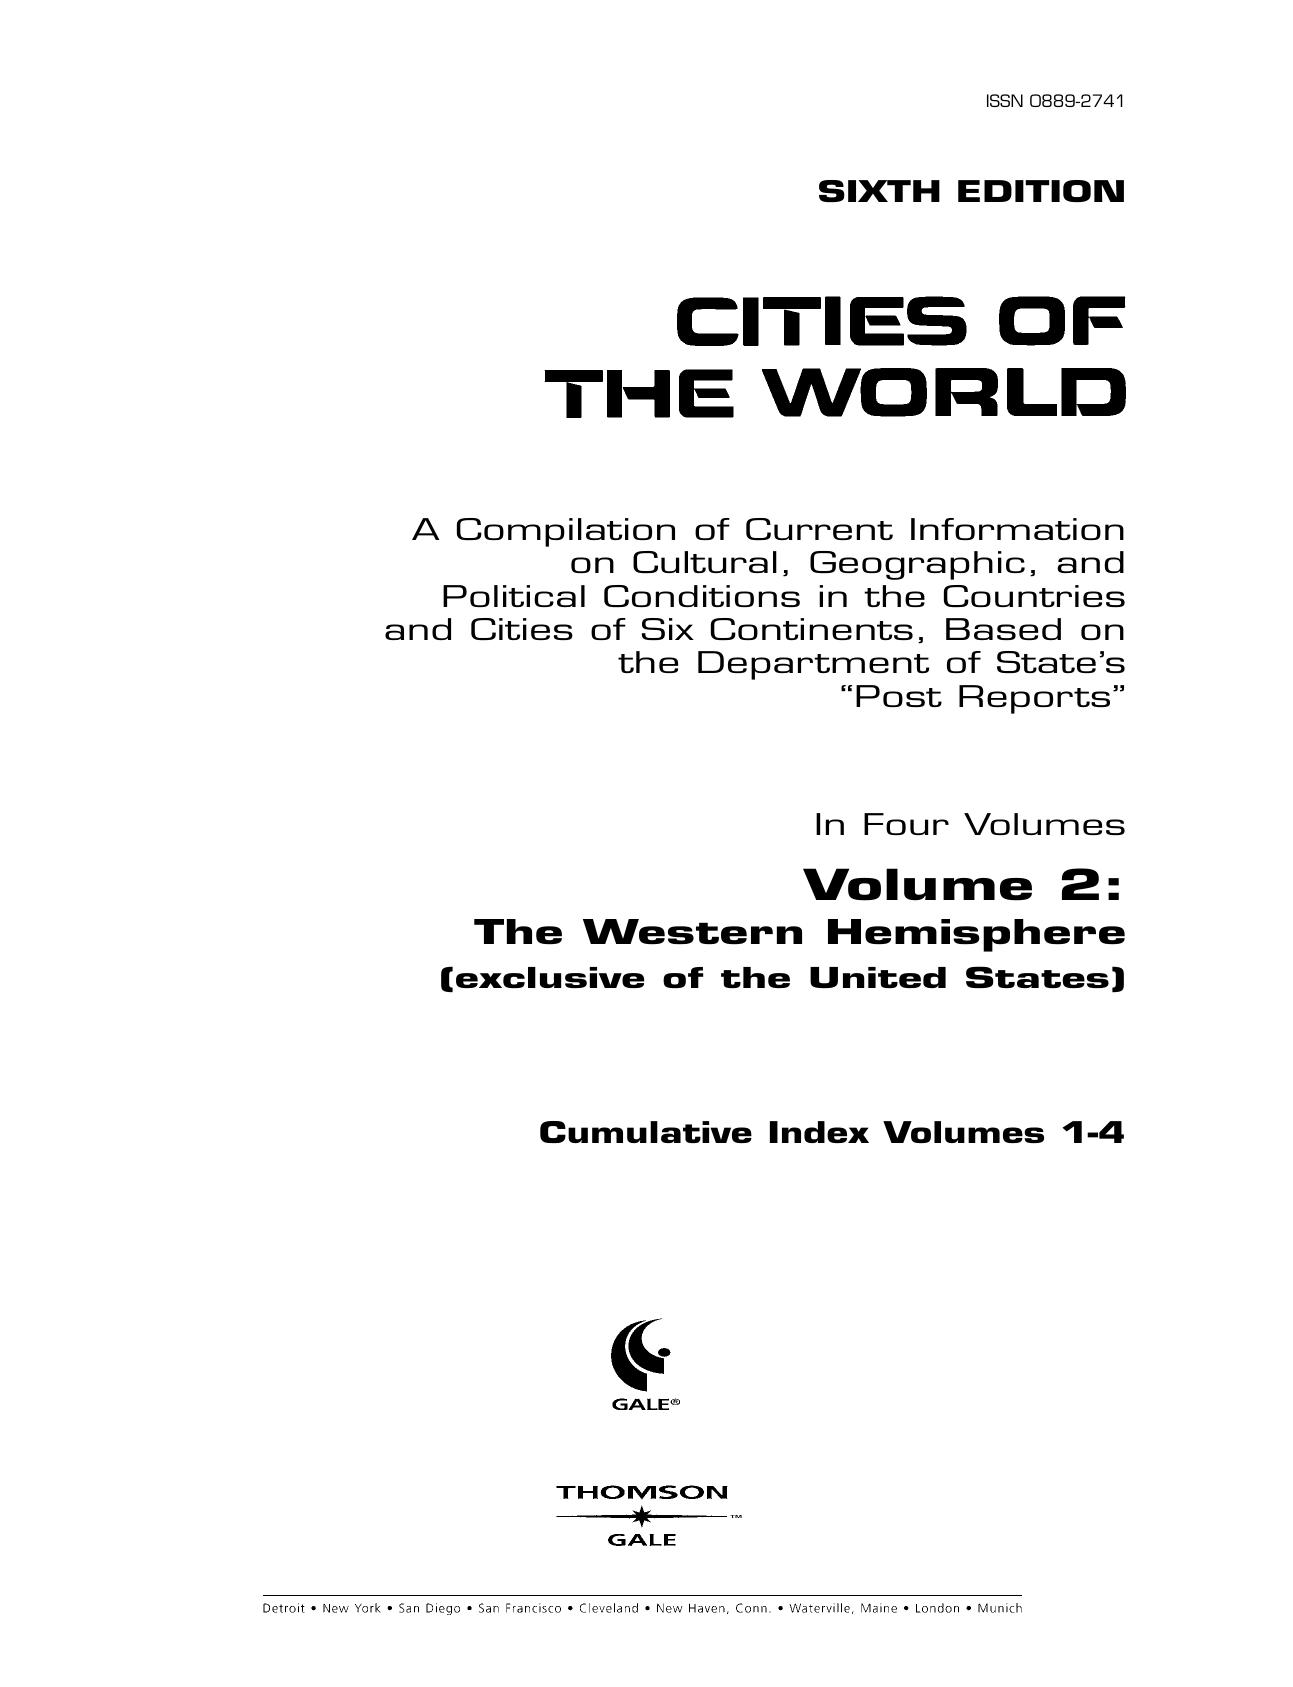 Gale - Cities of the World 6th edition - Vol 2